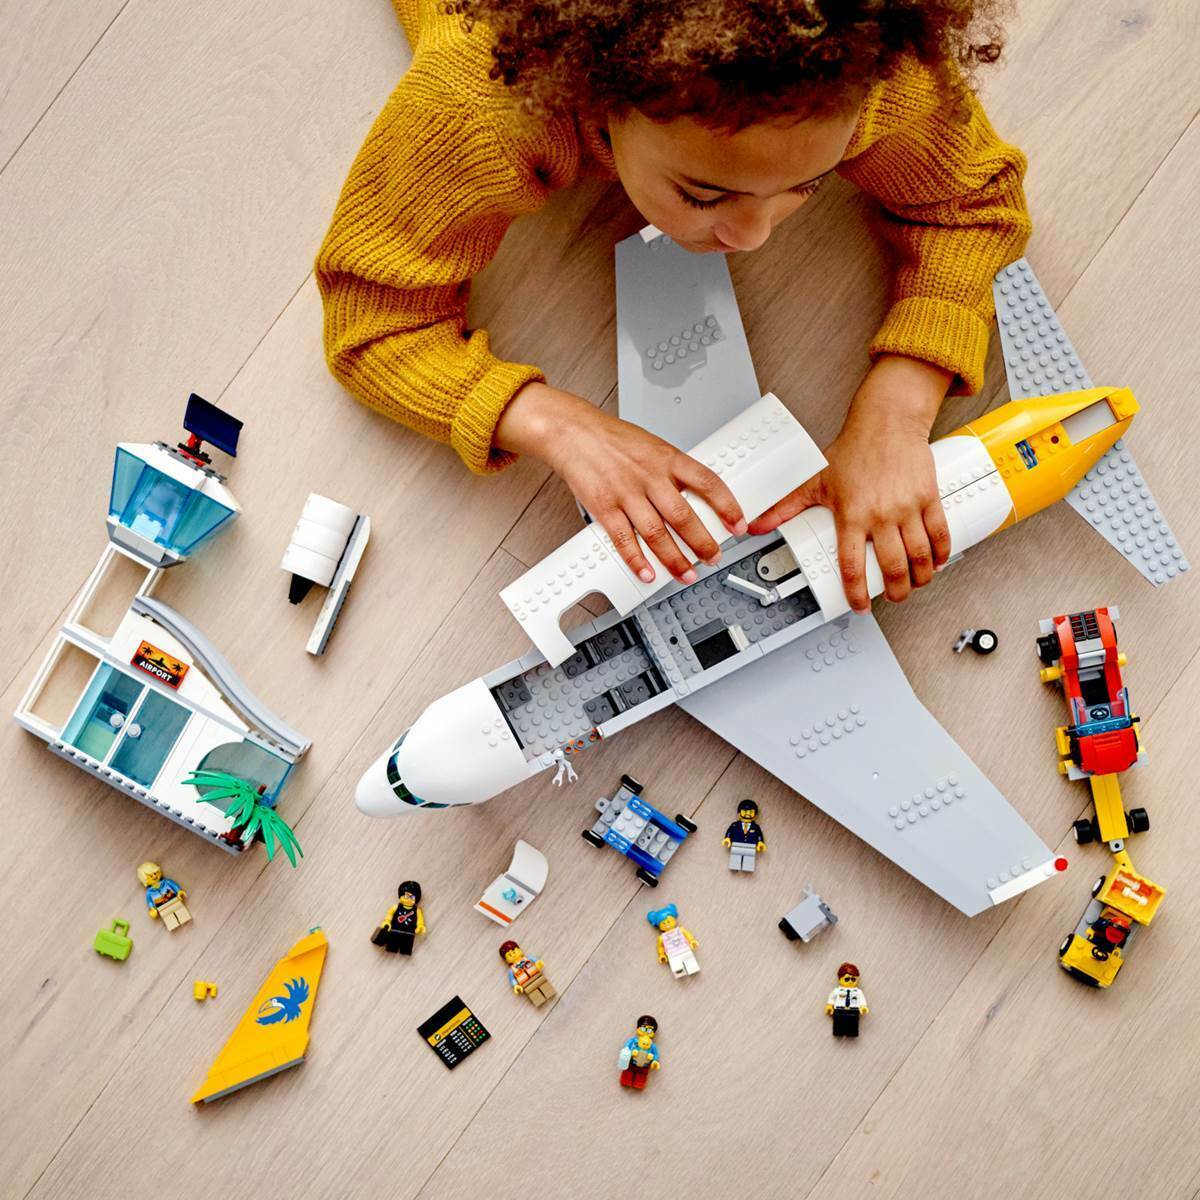 LEGO City Passenger Airplane 60262 Building Toy for Kids 669 Pieces